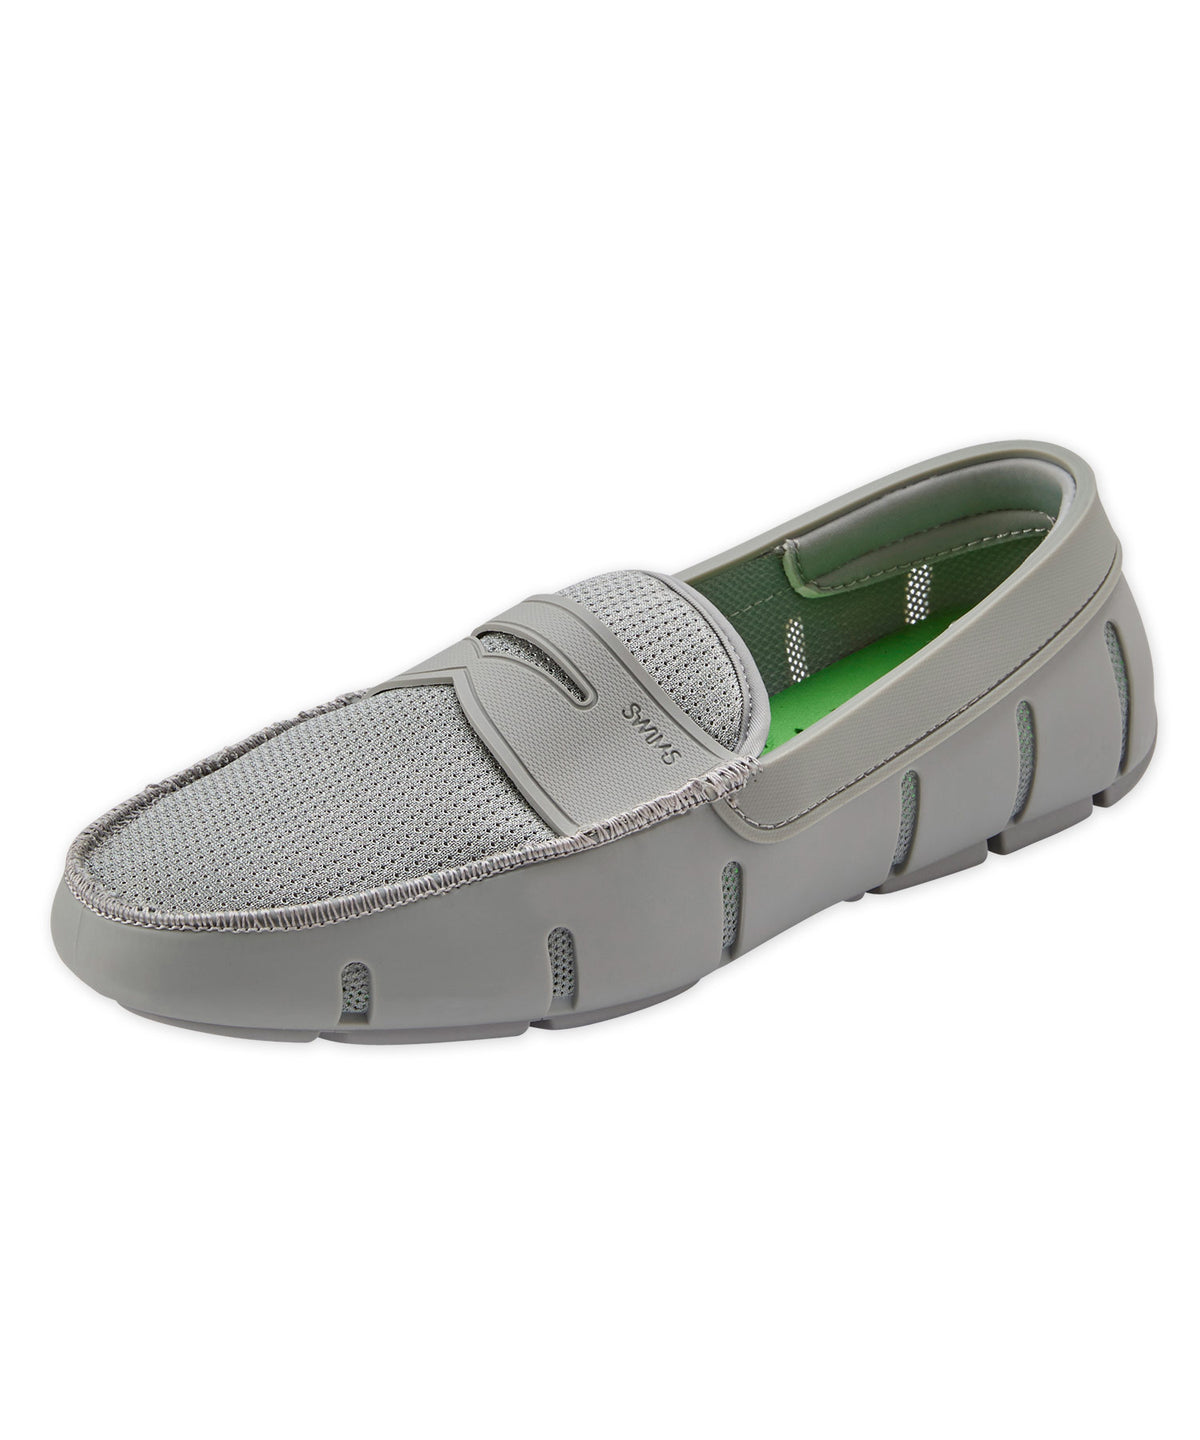 Swims Water-Resistant Penny Loafers, Men's Big & Tall